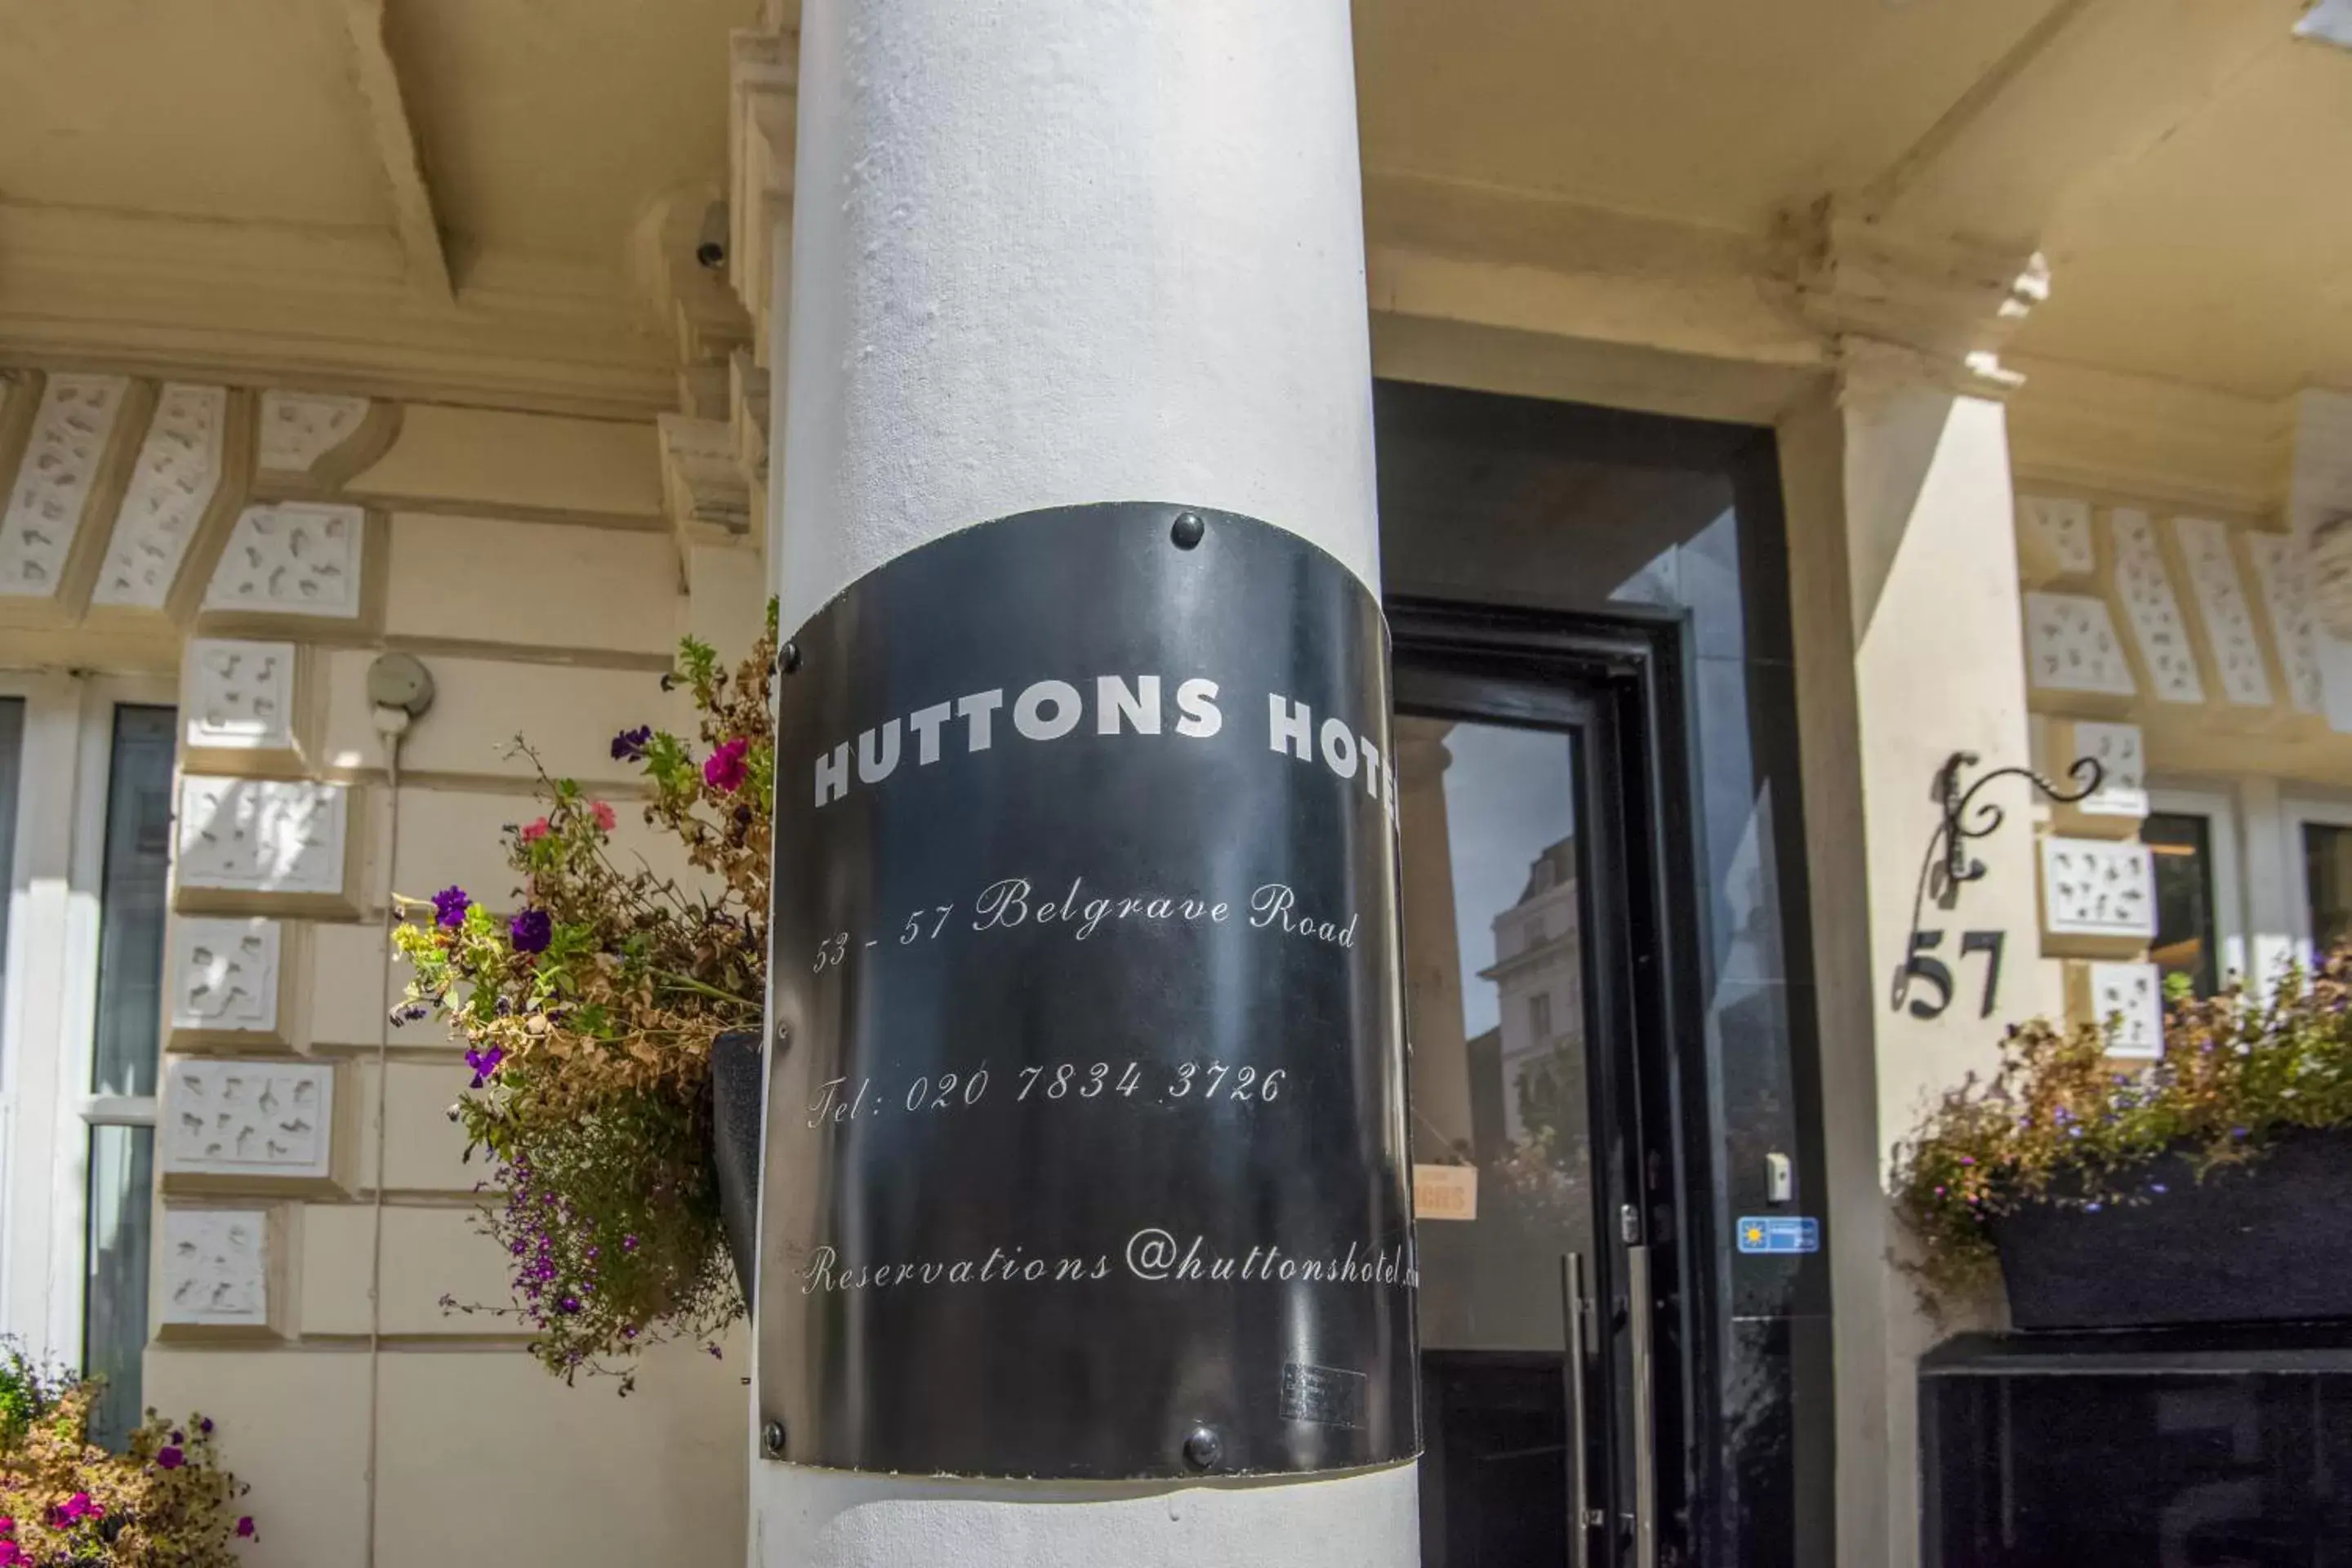 Property building in Huttons Hotel, Victoria London